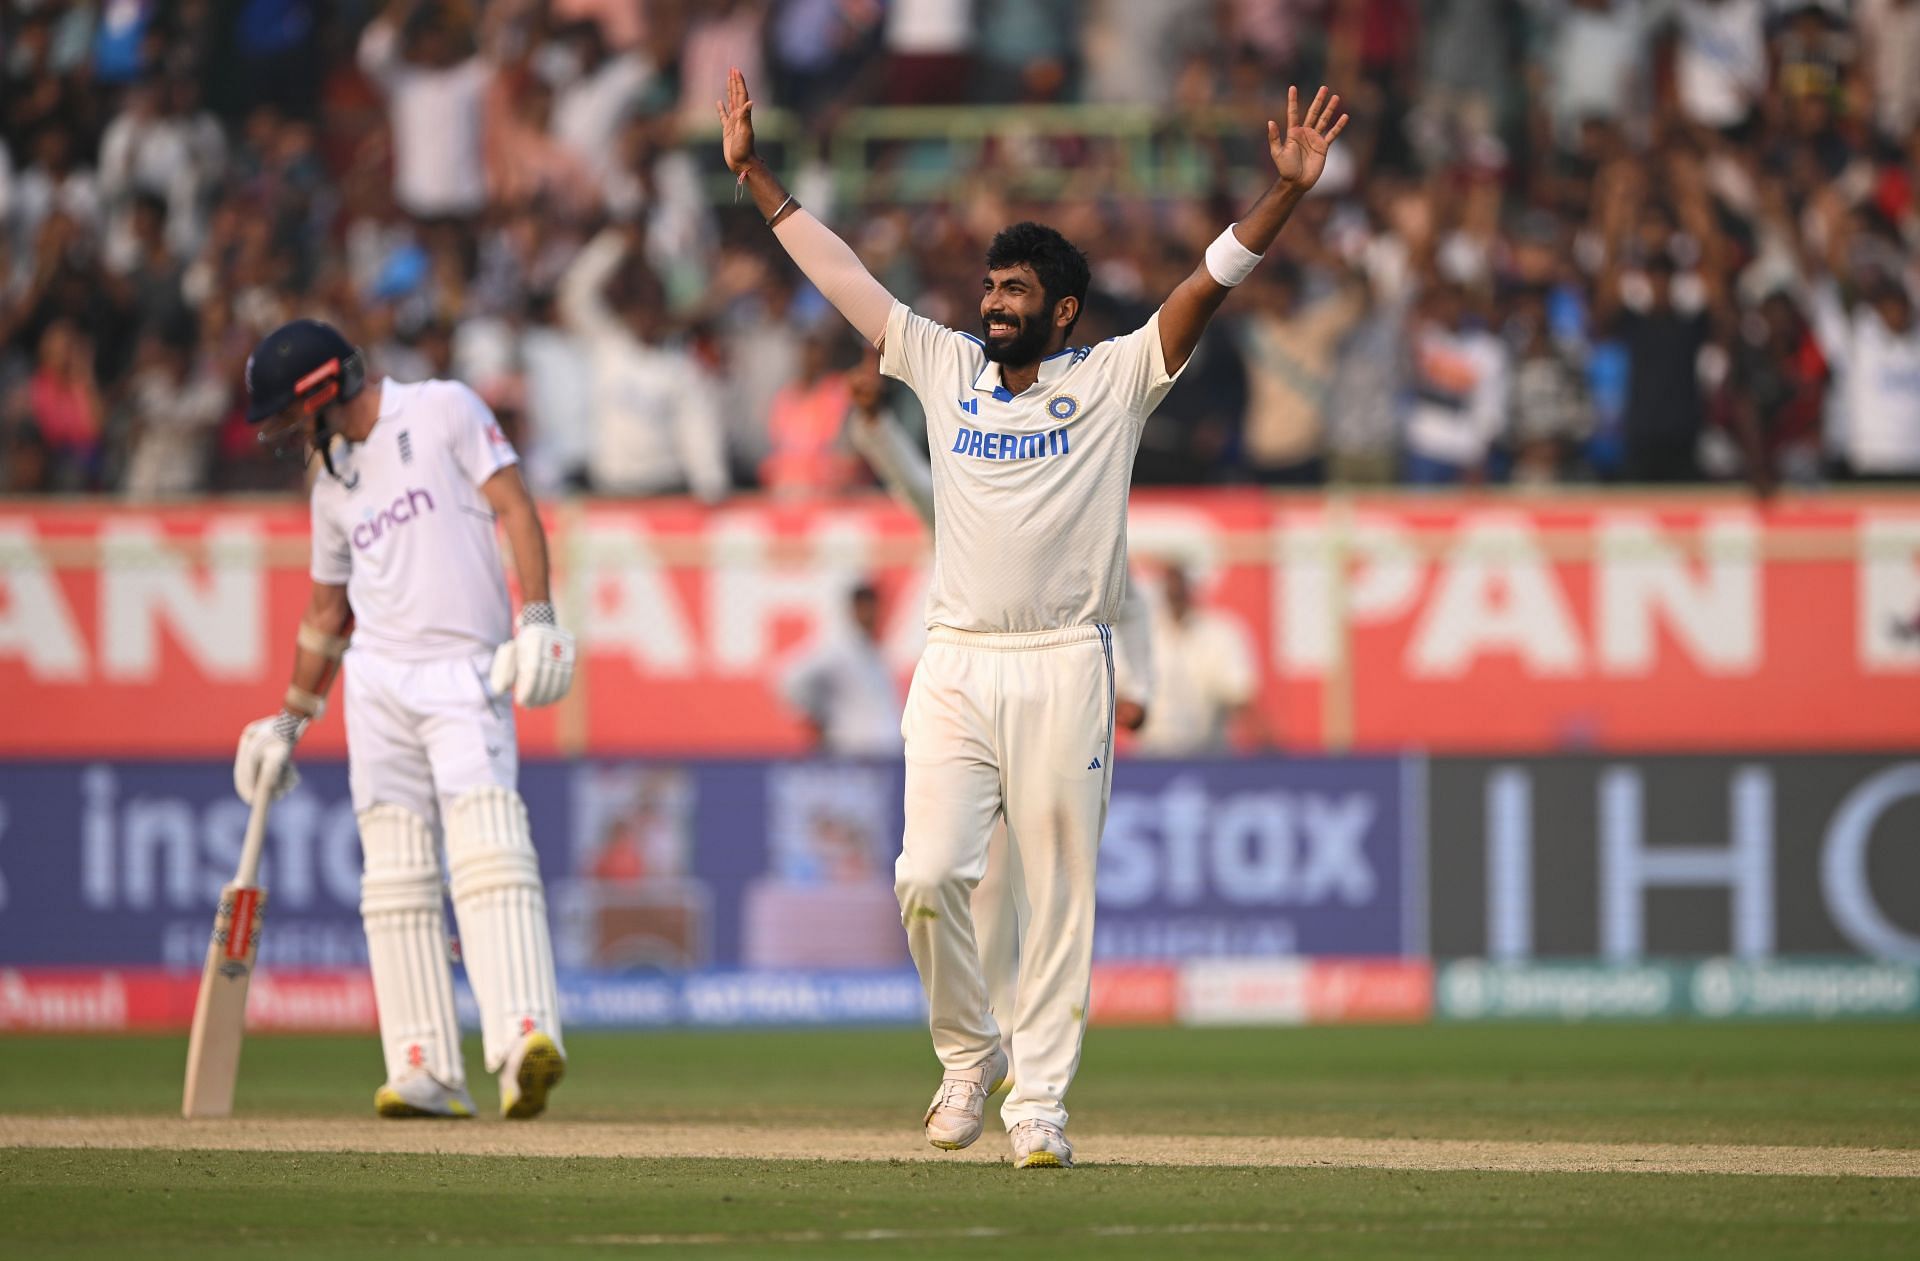 Bumrah single-handedly willed India to a dominant position on Day 2.